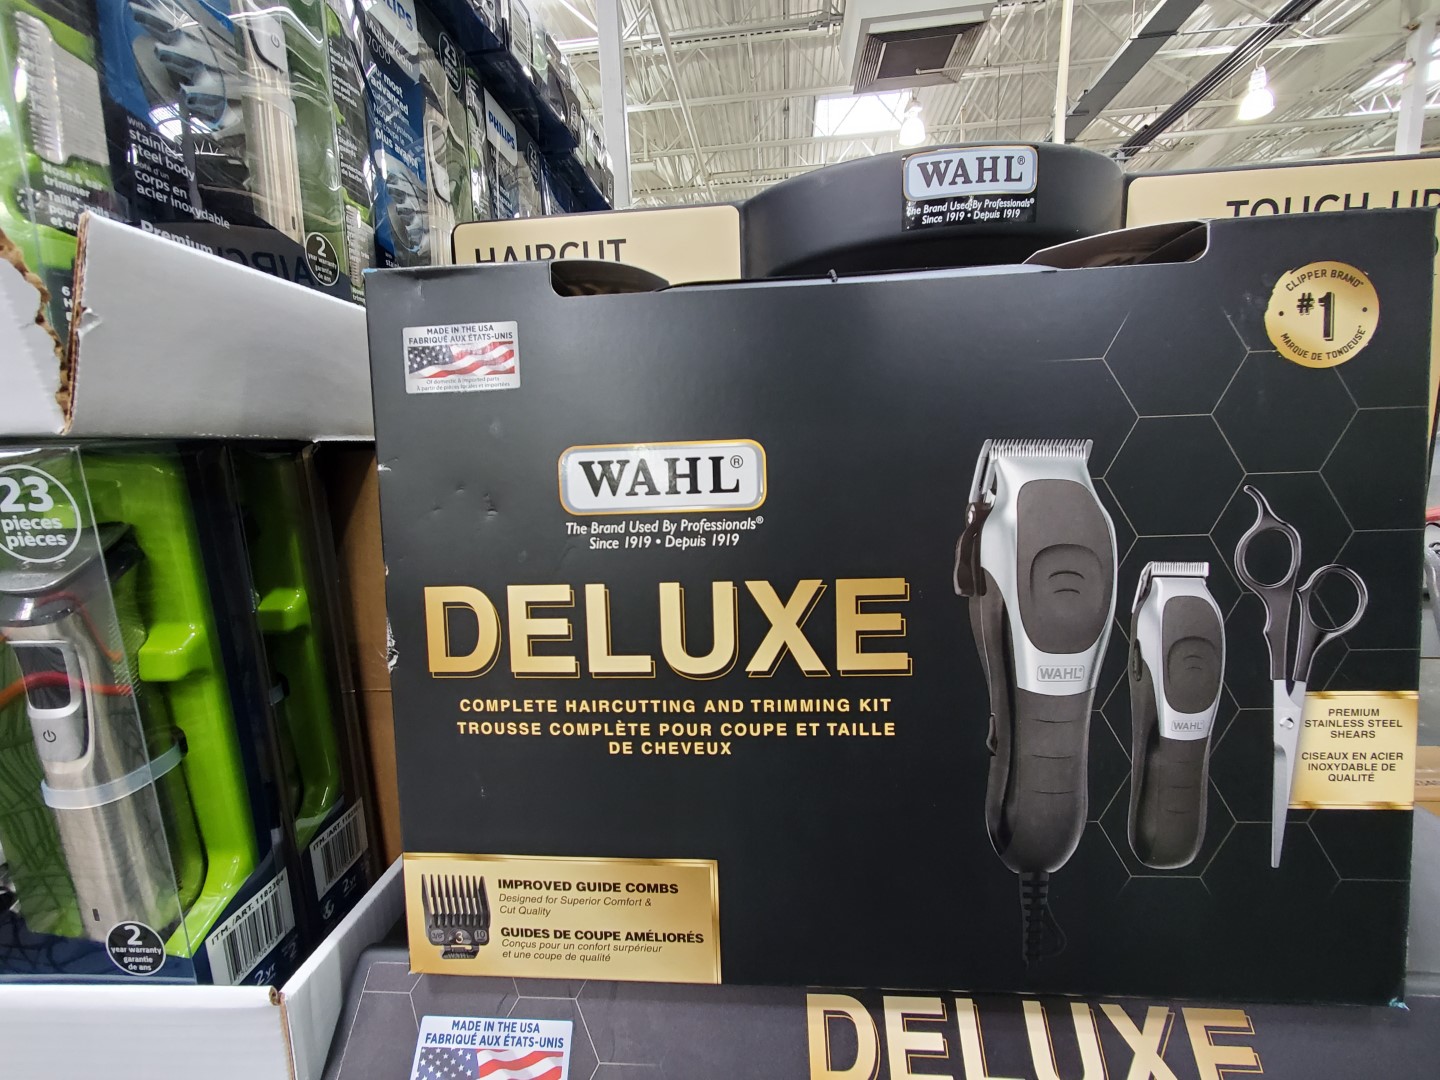 Wahl deluxe haircutting kit